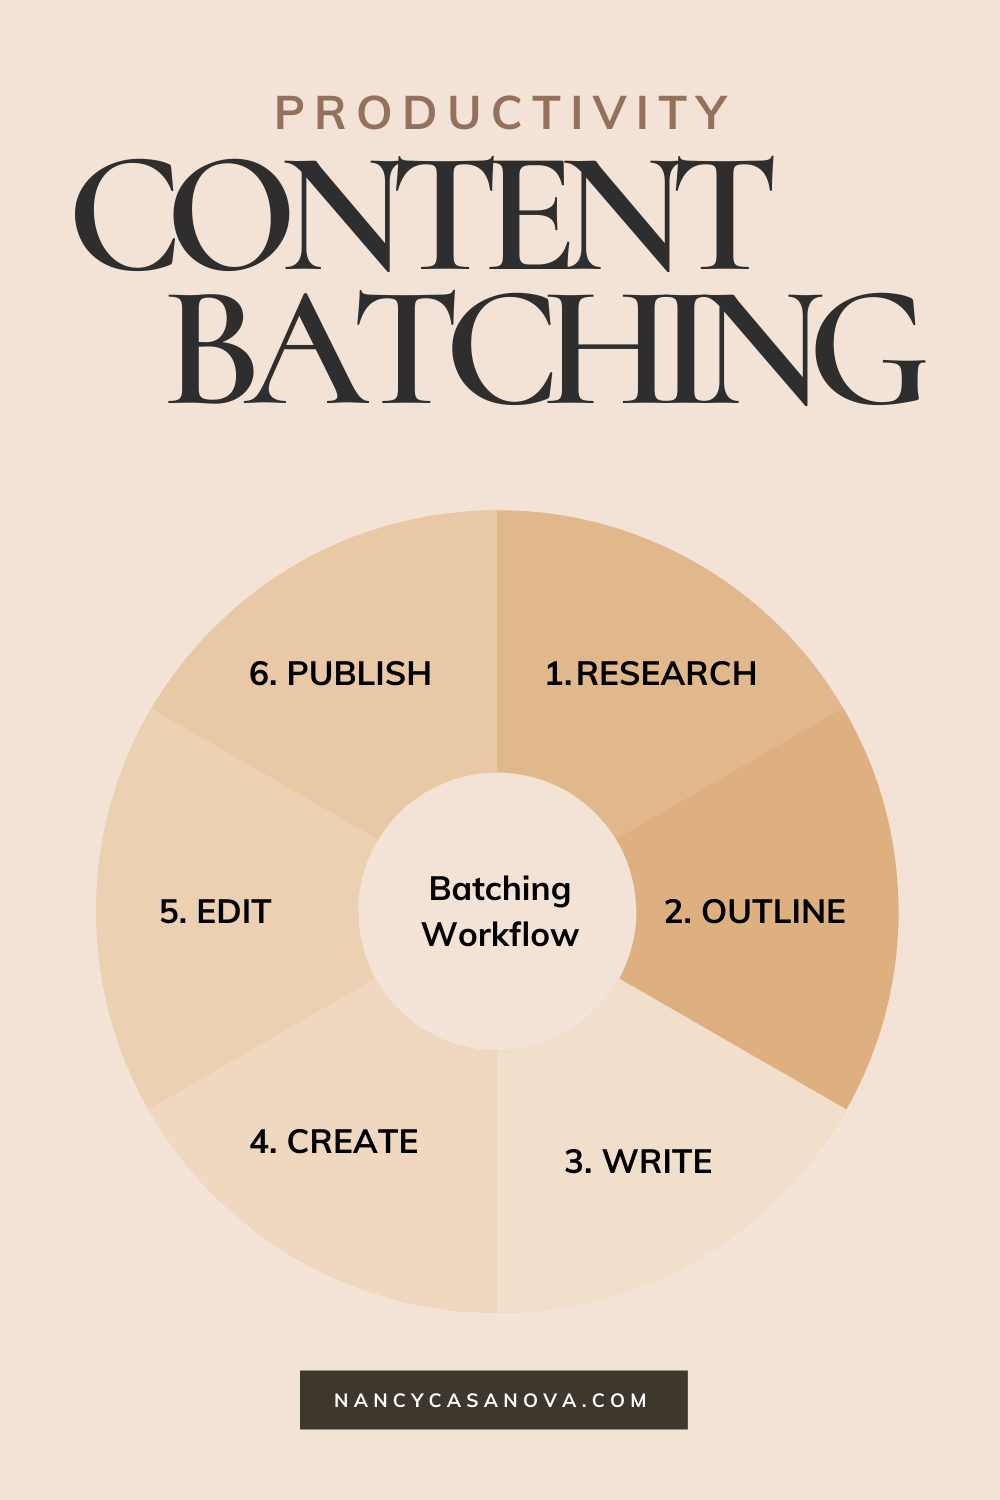 Establish a content batching workflow to help you maintain a consistent and productive workflow. content batching, batching social media content, batching productivity, batching content, batching tasks, social media strategy, social media marketing, social media content, batch blogging, online business, instagram tips, content marketing